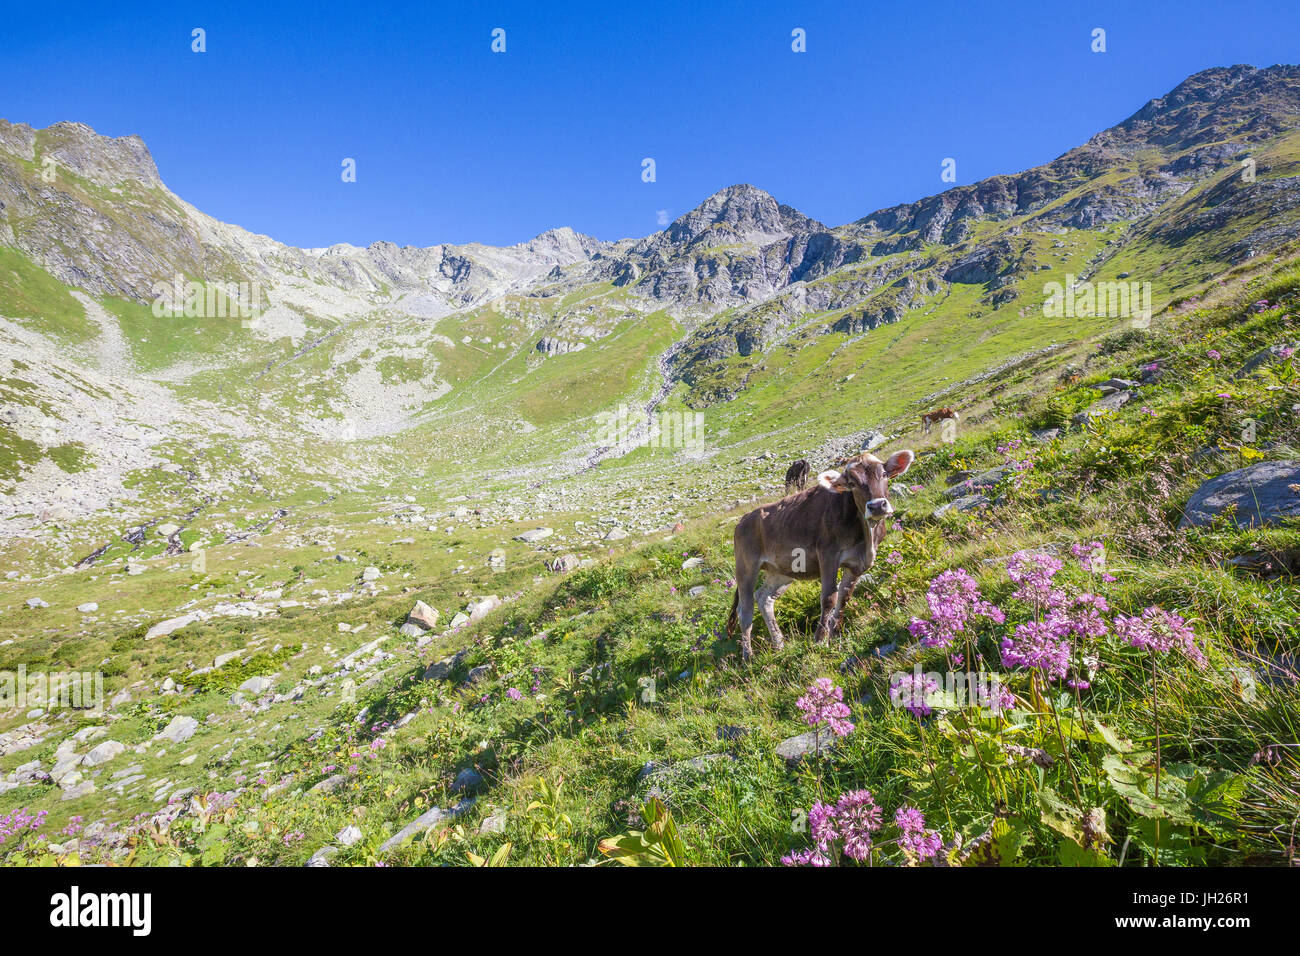 Cows graze in the green pastures with the rocky peak Suretta in the background, Chiavenna Valley, Valtellina, Lombardy, Italy Stock Photo